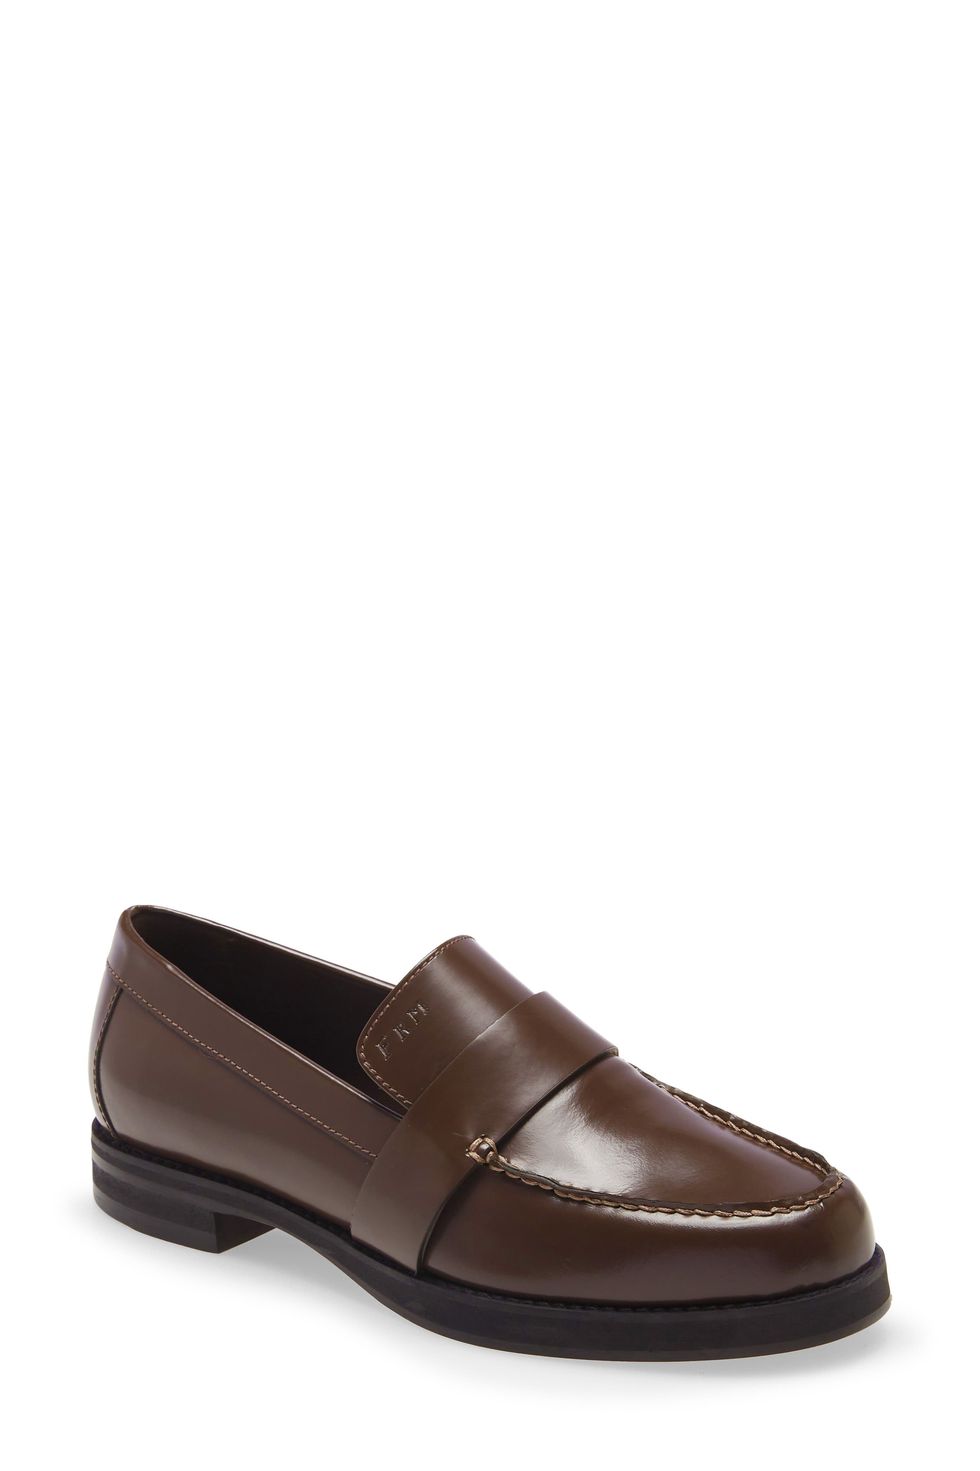 Le Beacon Loafer